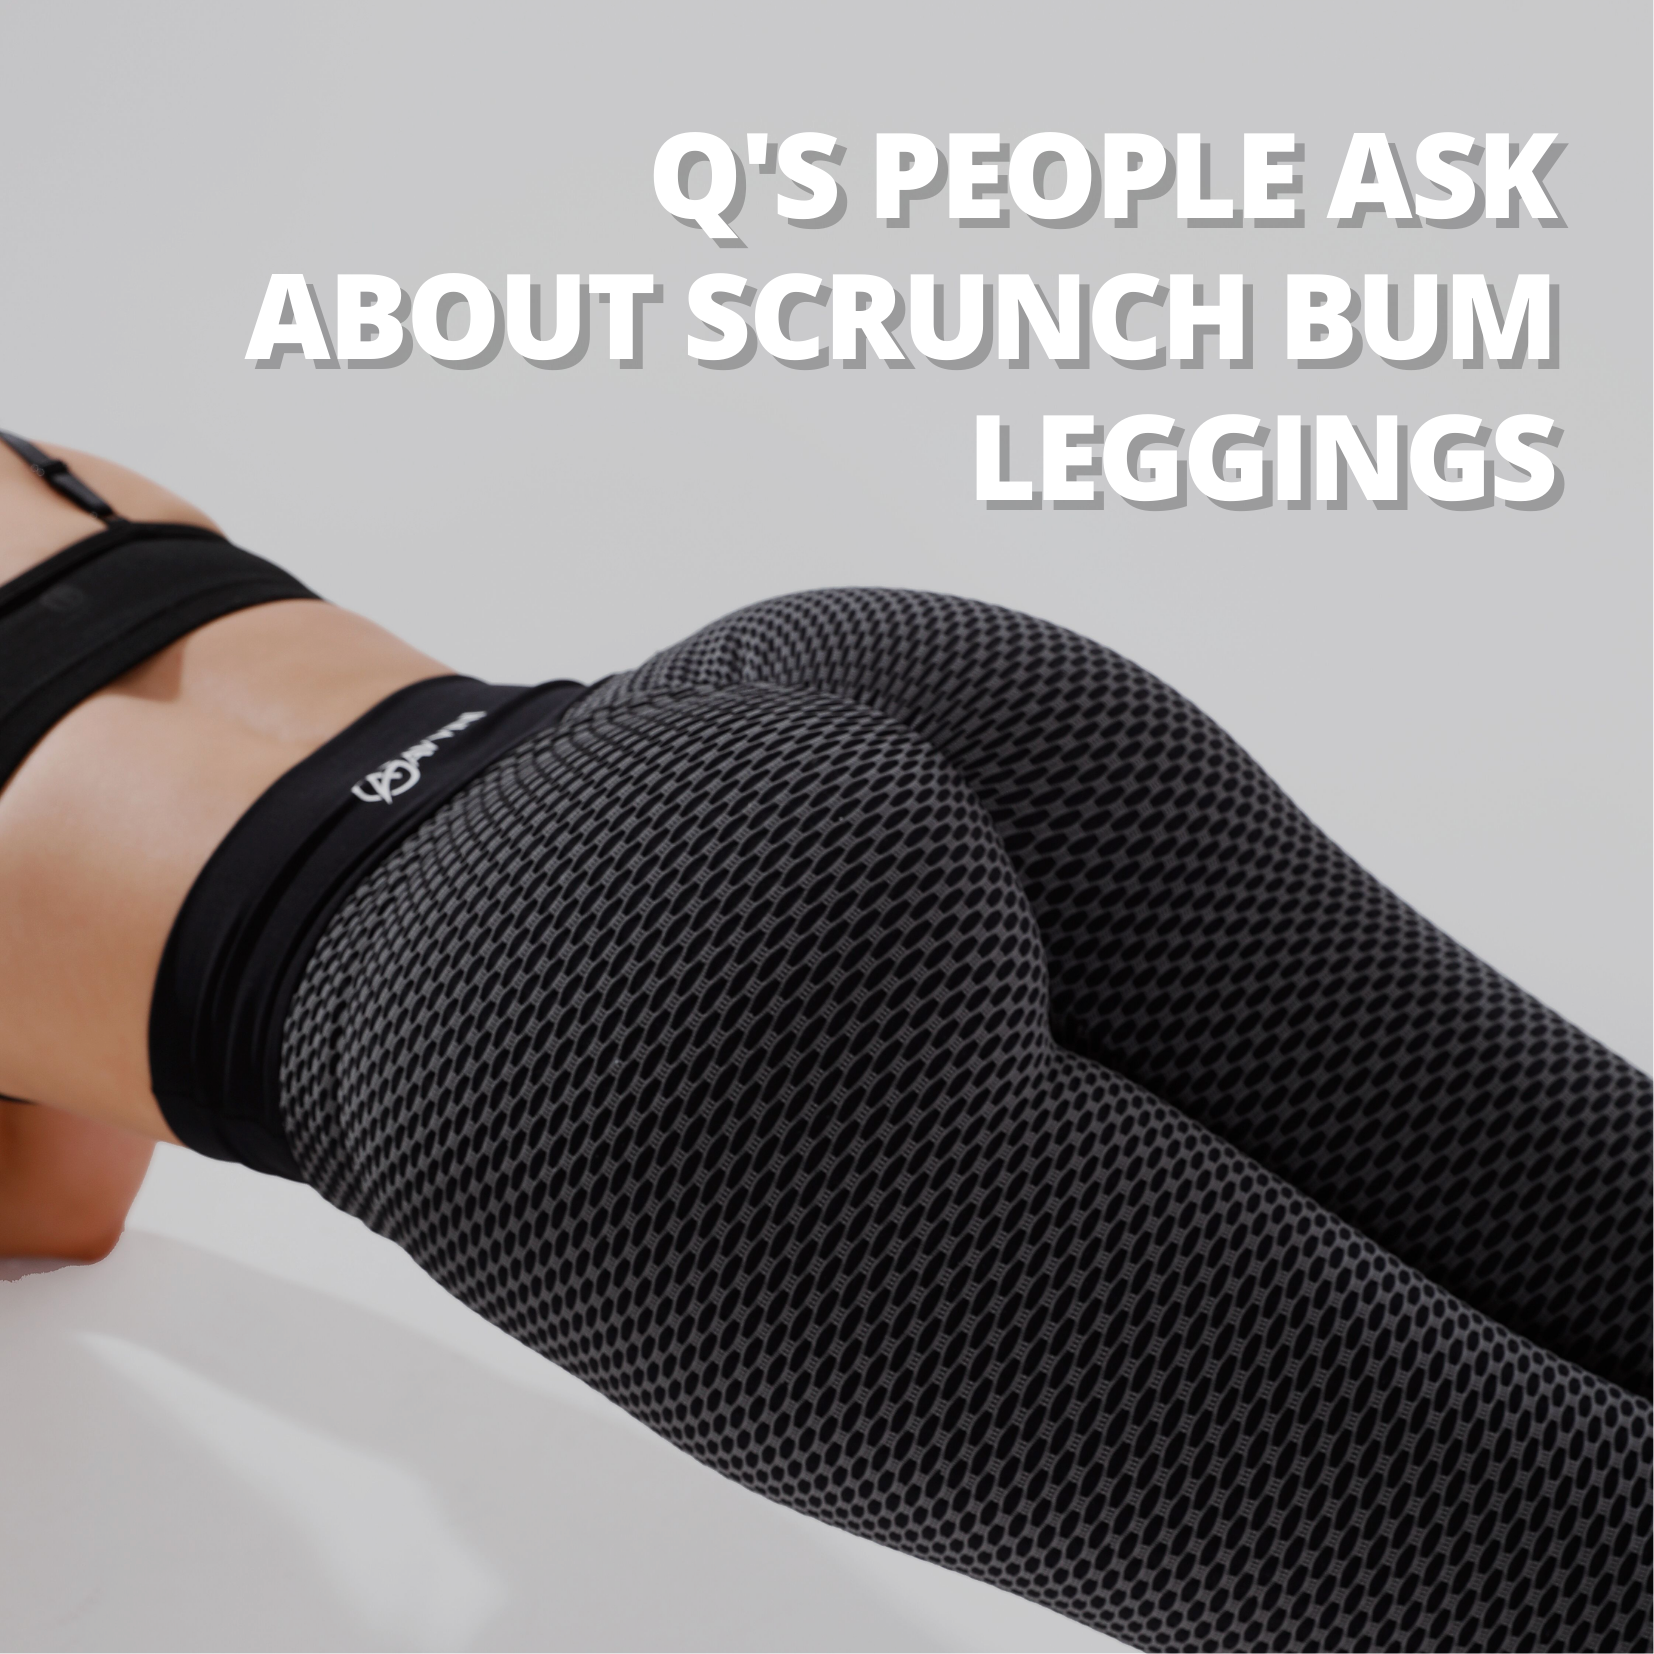 Questions People Ask About Scrunch Bum Leggings